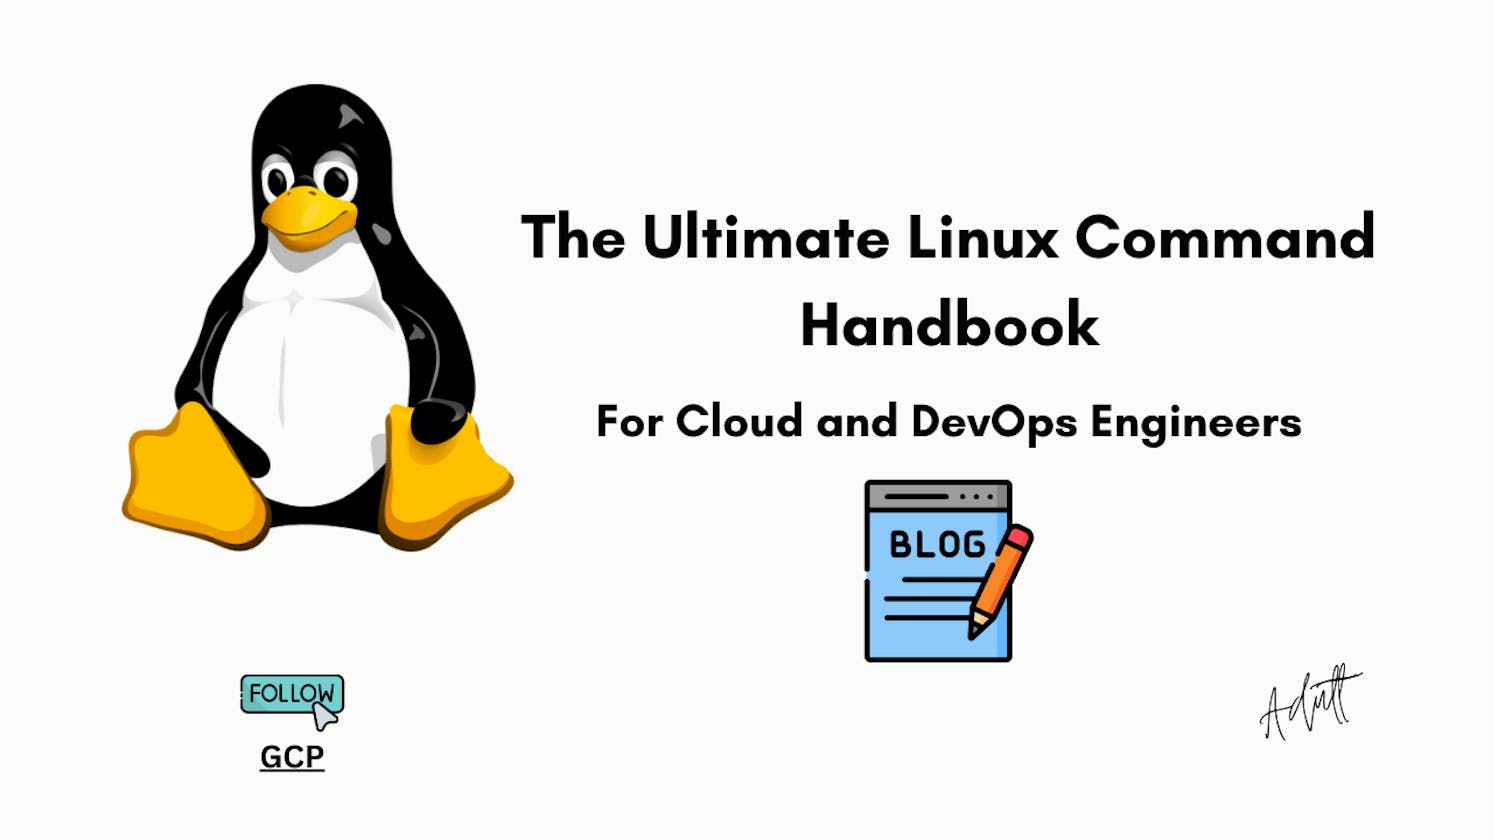 The Ultimate Linux Command Handbook for Cloud and DevOps Engineers